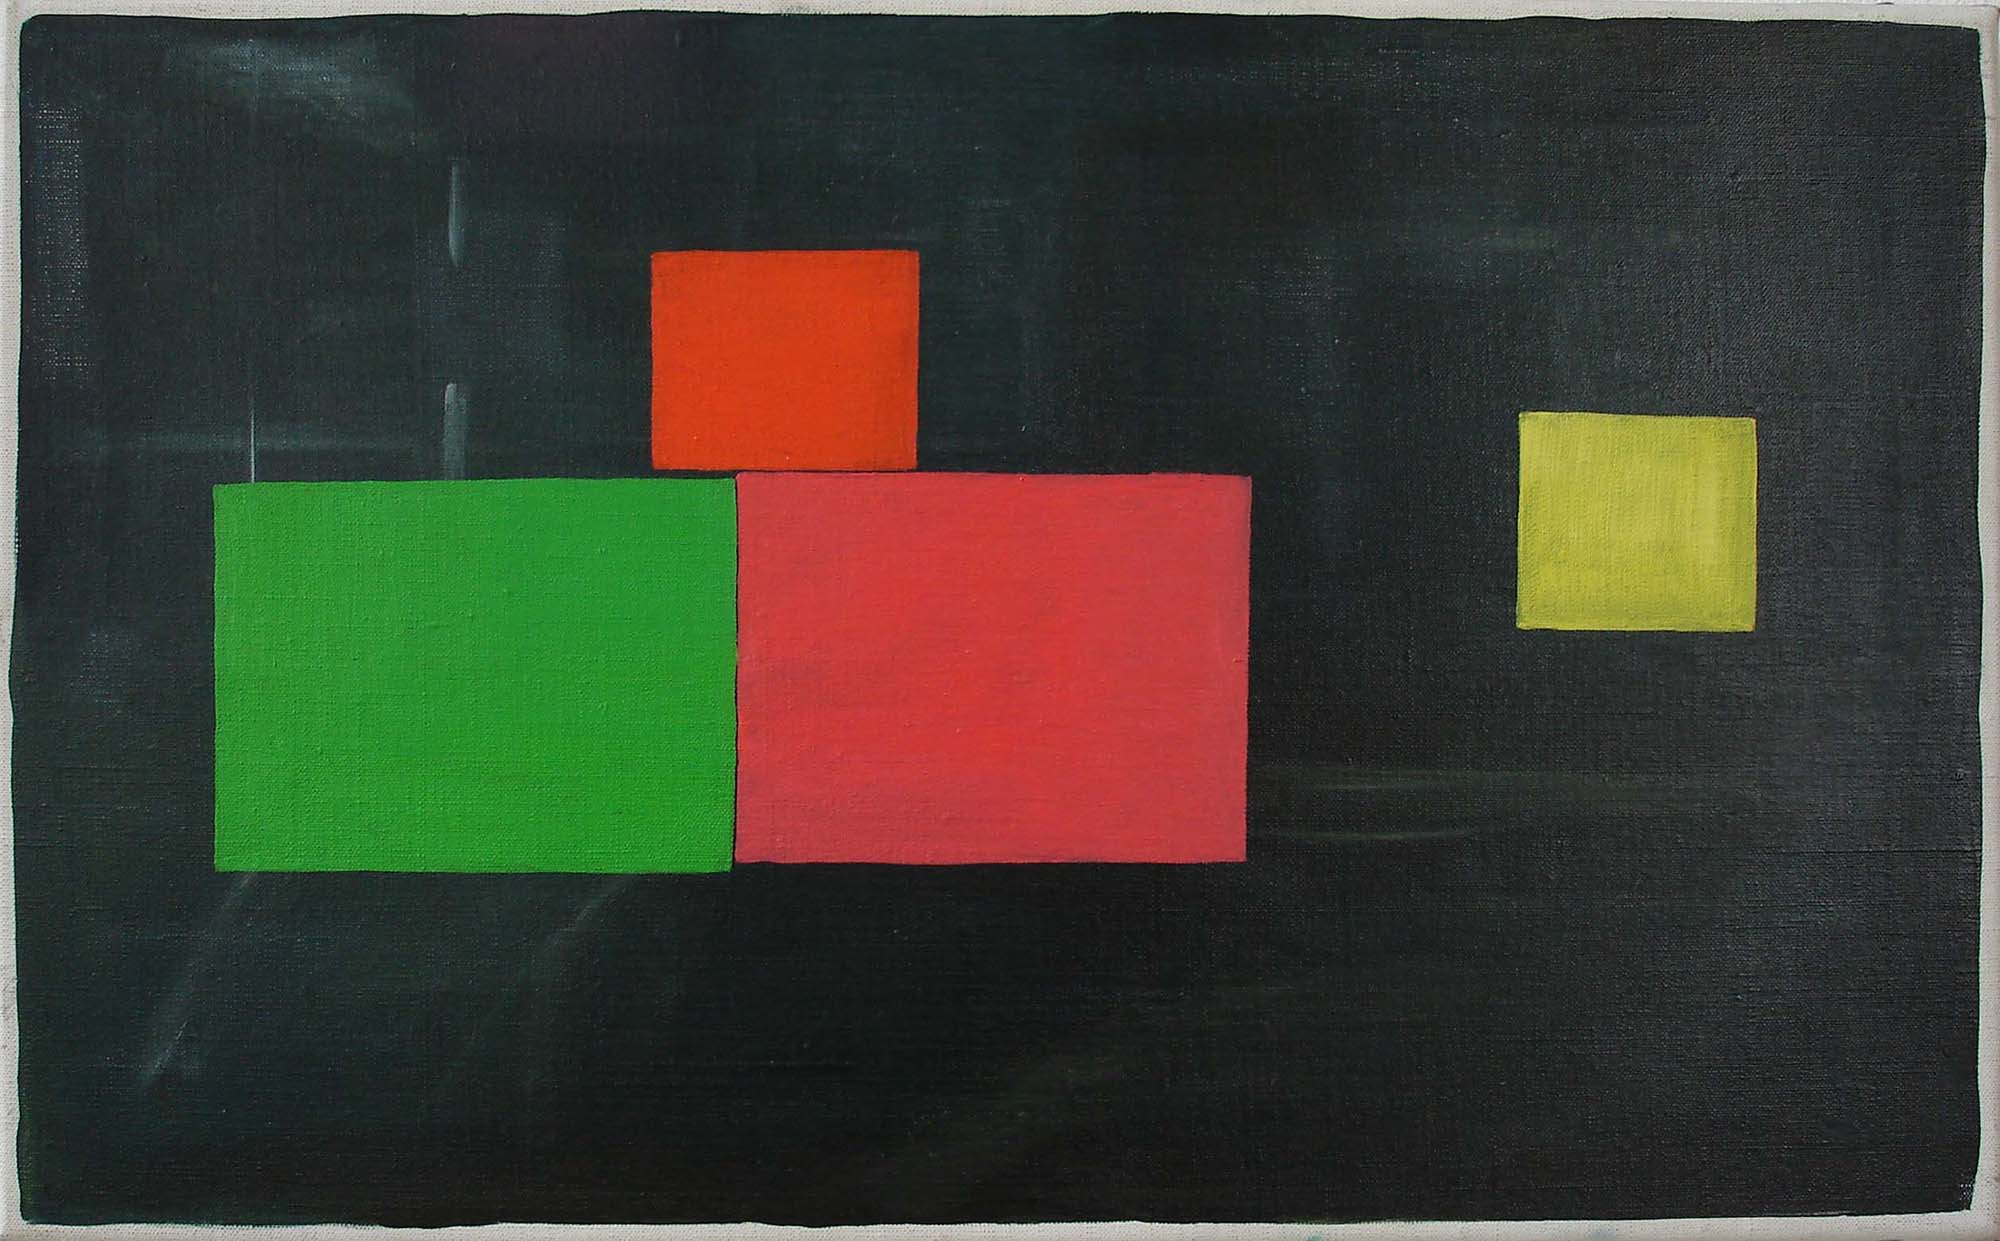   Untitled    2003, oil on canvas, 46 x 35cm  